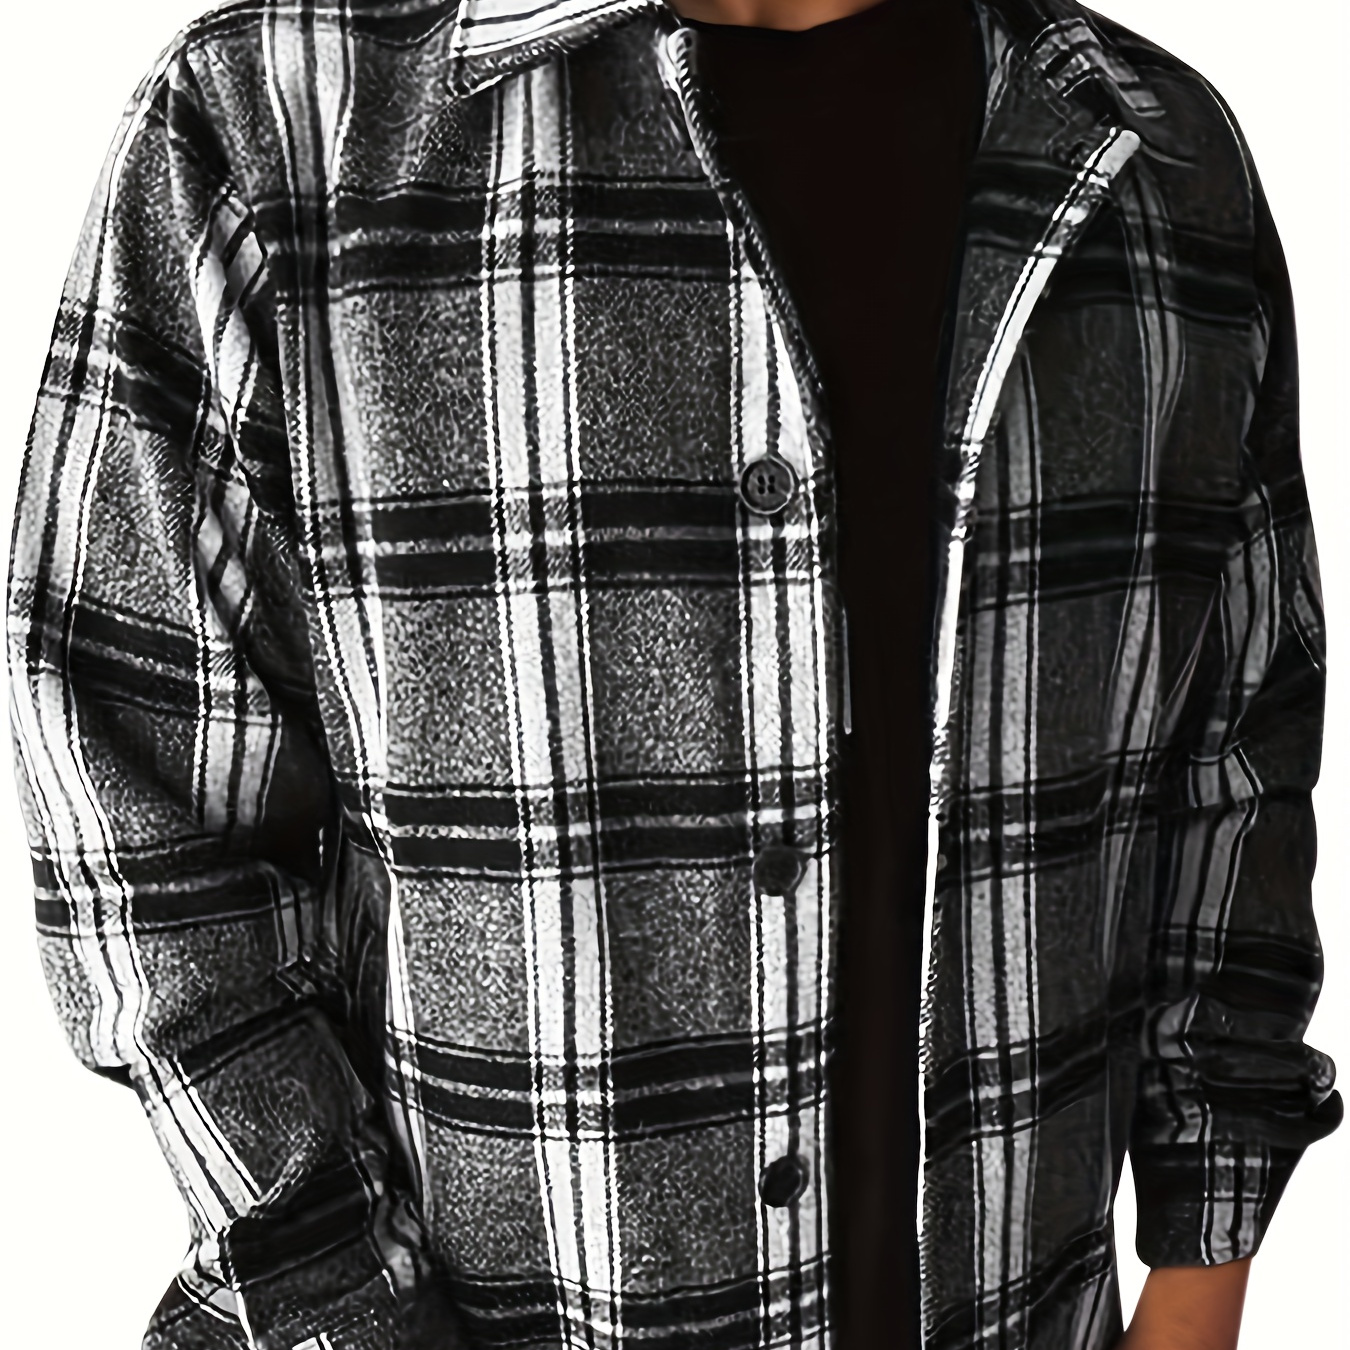 

Plus Size Men's Plaid Shirt For Spring/autumn, Casual Fashion Shirt Tops For Males, Men's Clothing